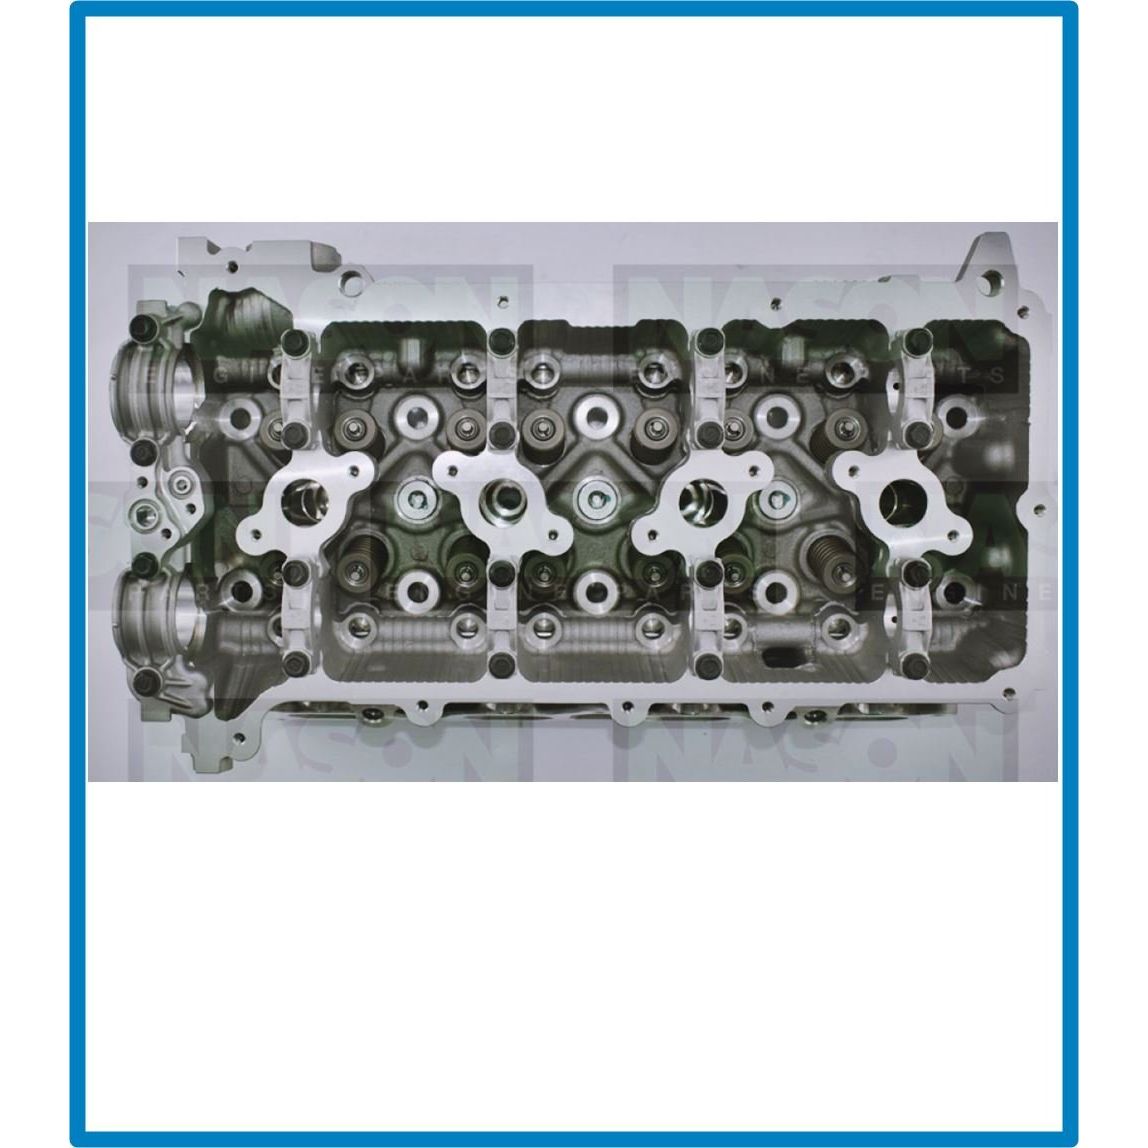 HiAce Hilux 2TR-FE Complete Cylinder Head - Supreme Head Supply